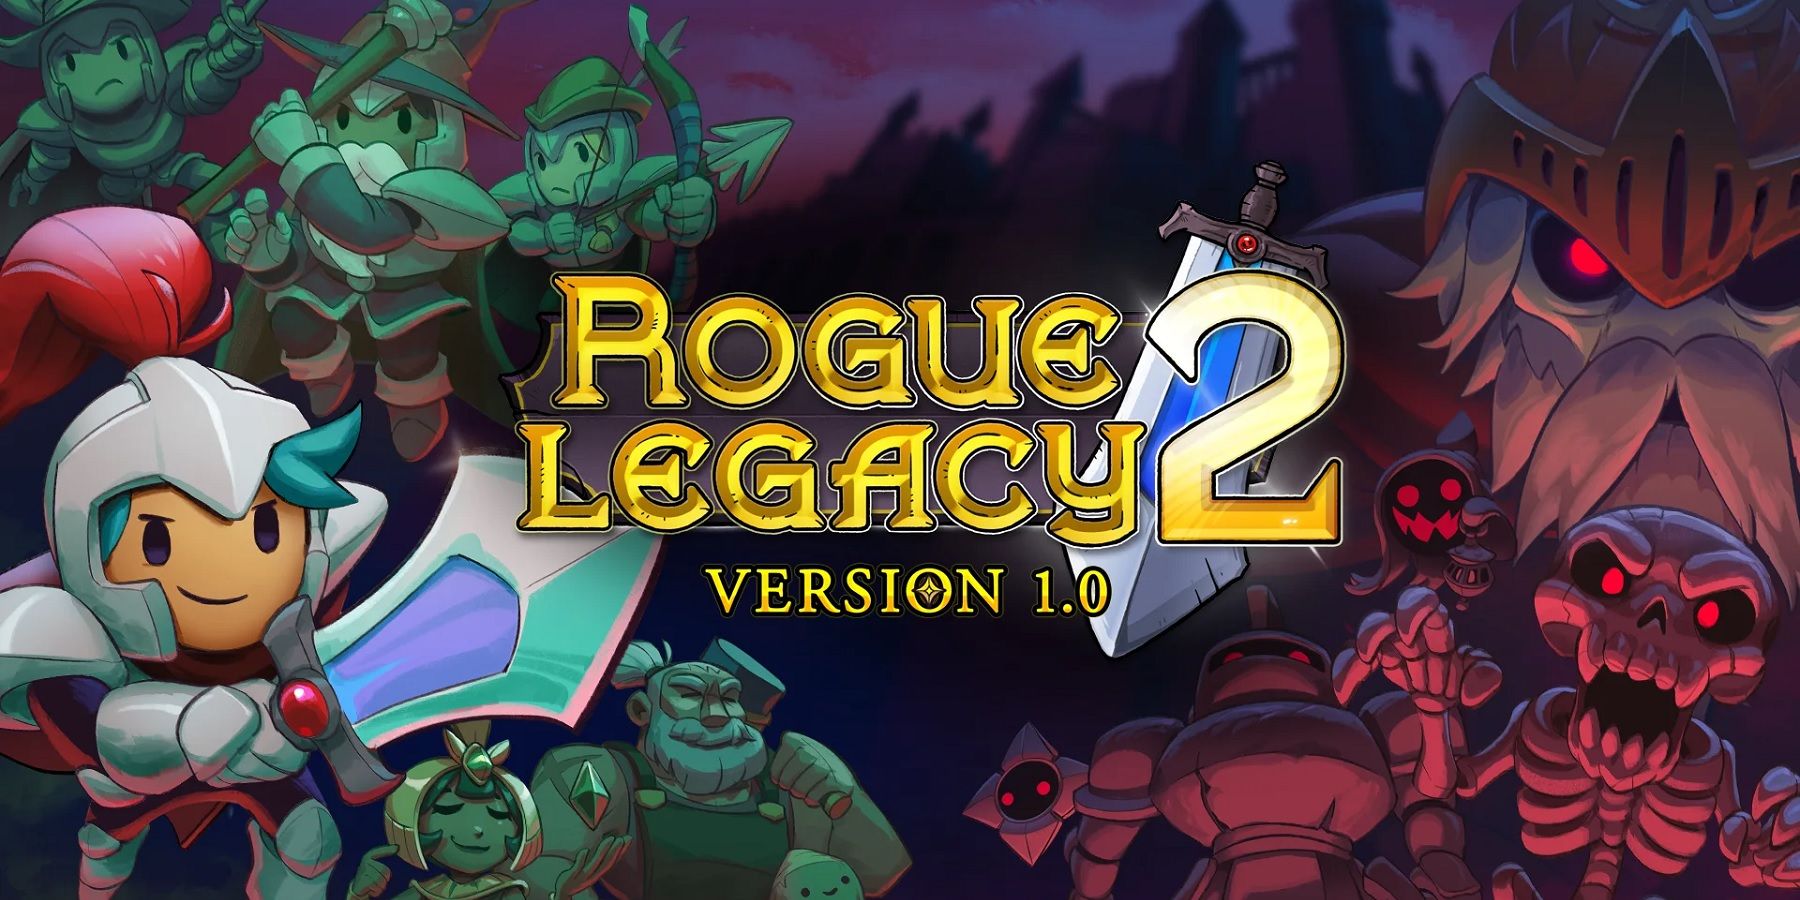 rogue legacy 2 release date